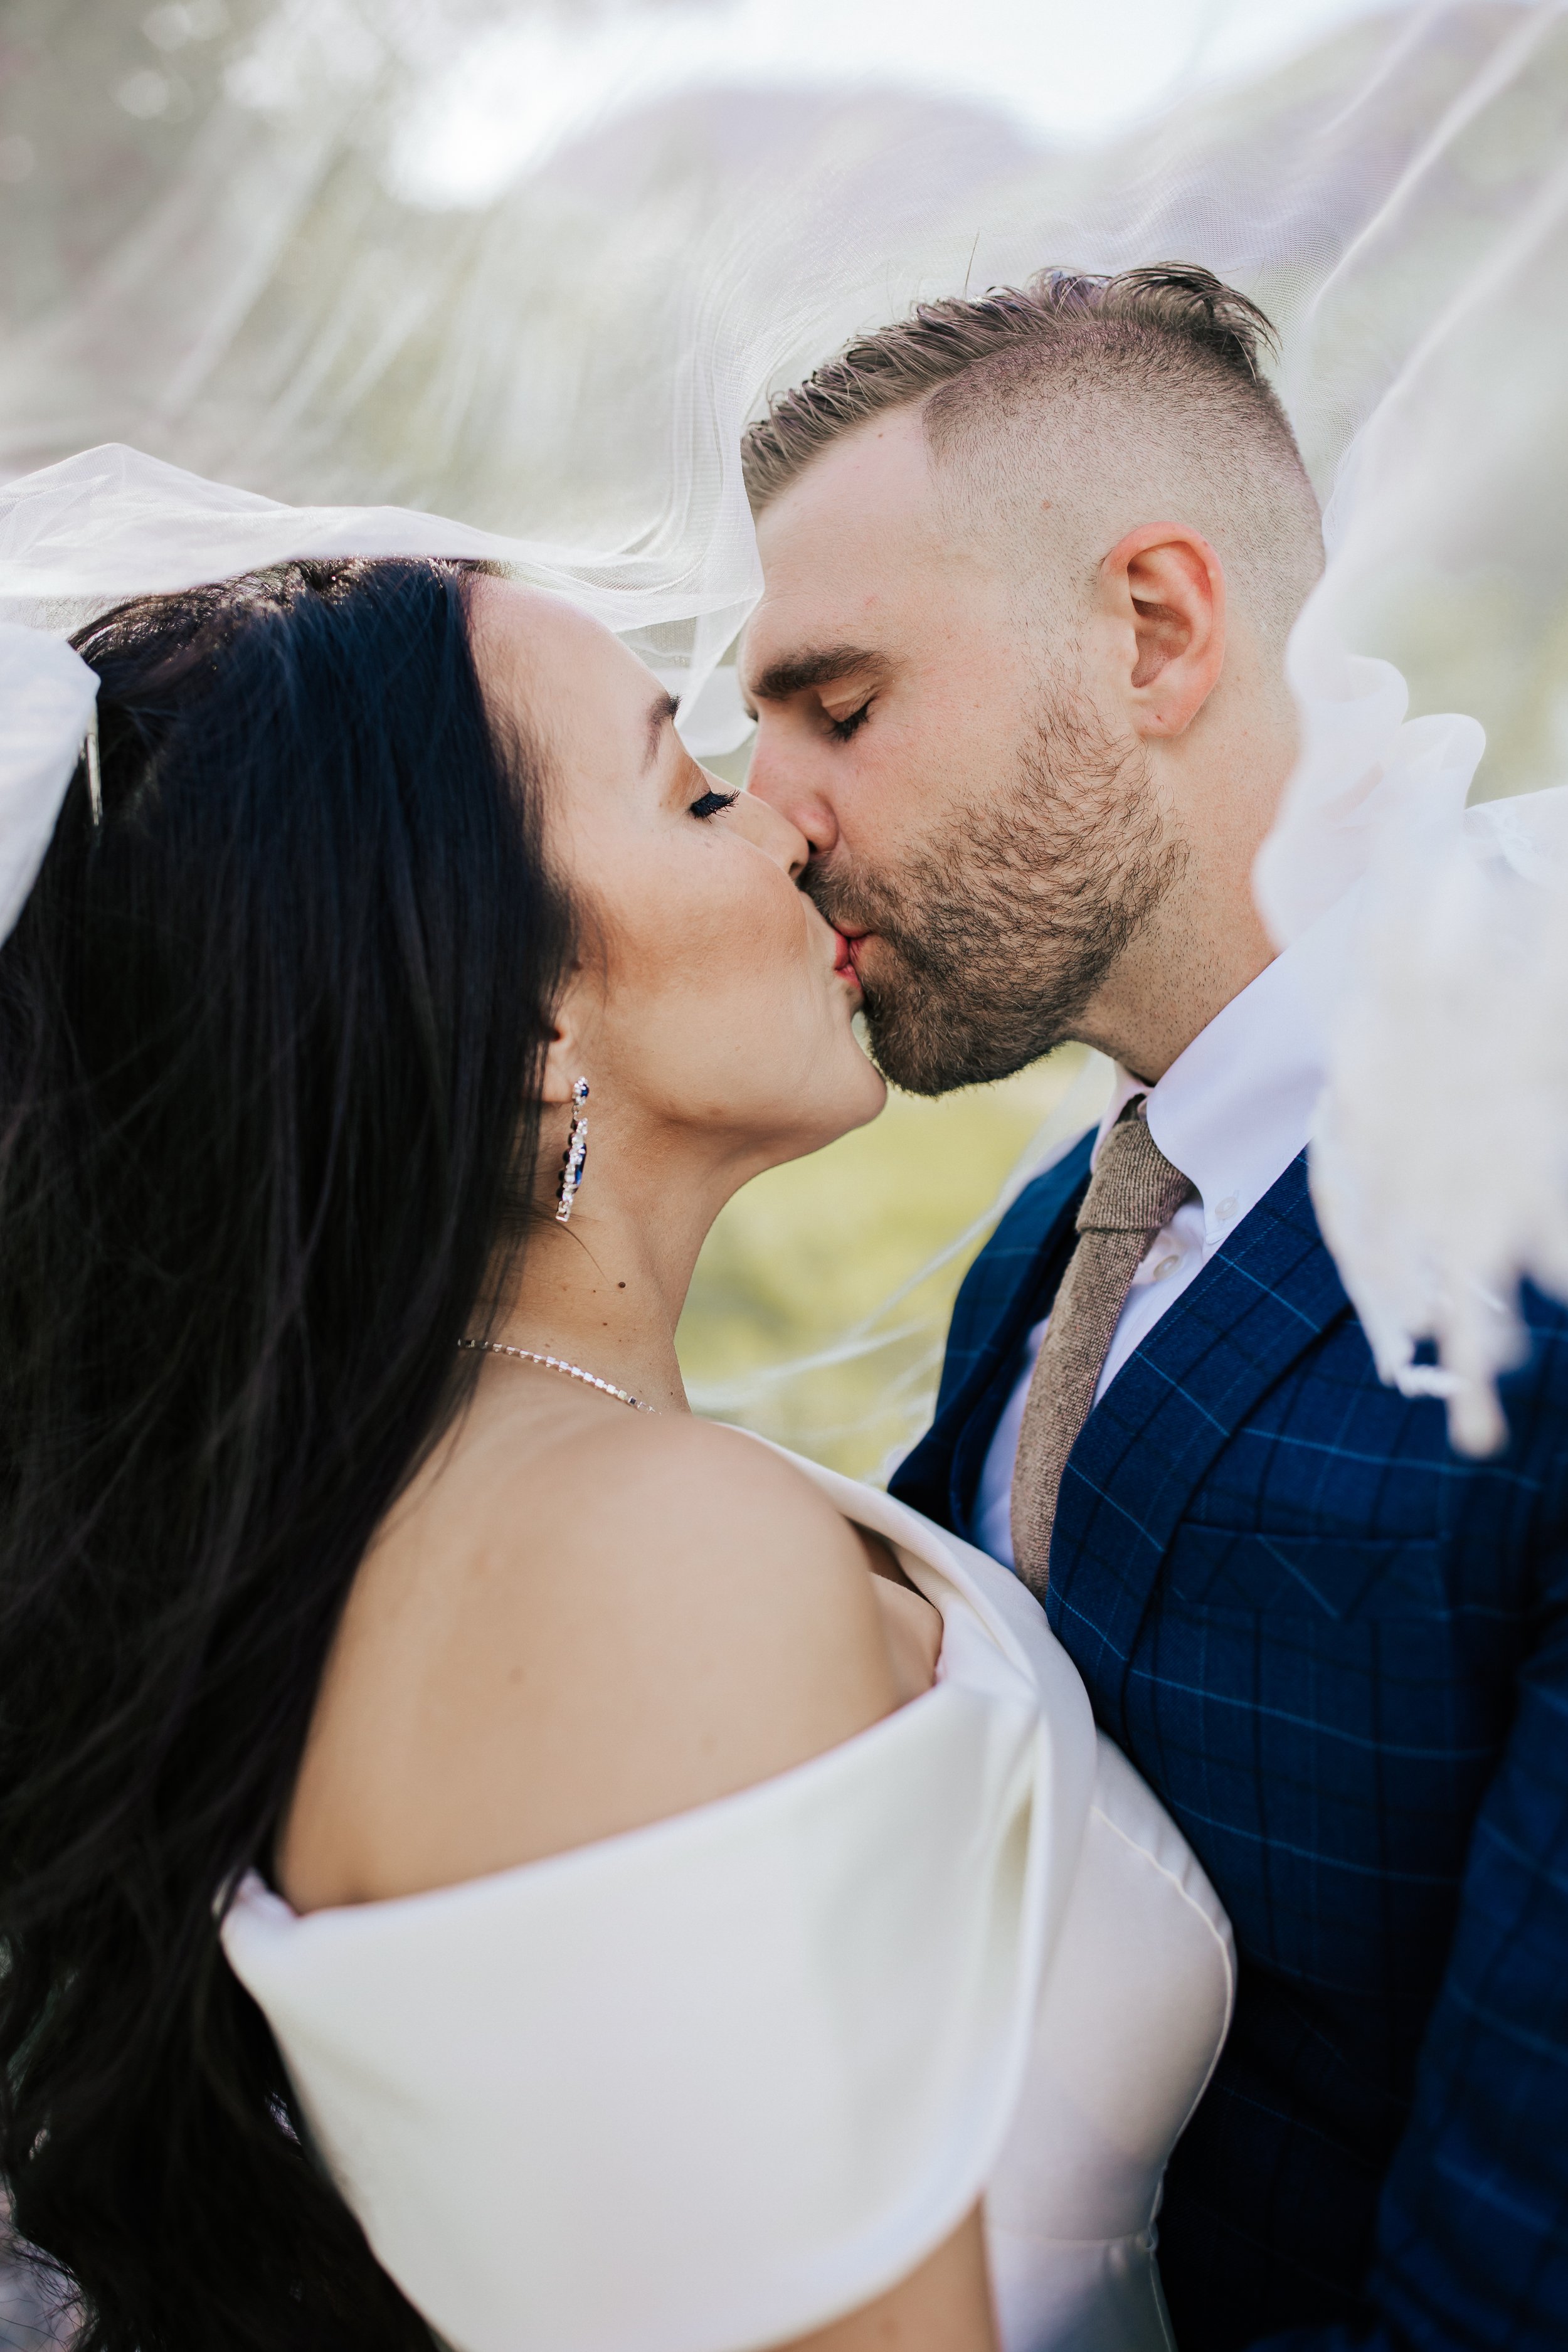  Bride and groom kiss under her wedding veil. First look session with bride and groom before their wedding ceremony in Aspen Grove, Provo Canyon, Utah. #weddingdress #firstlook #bridalportraits 